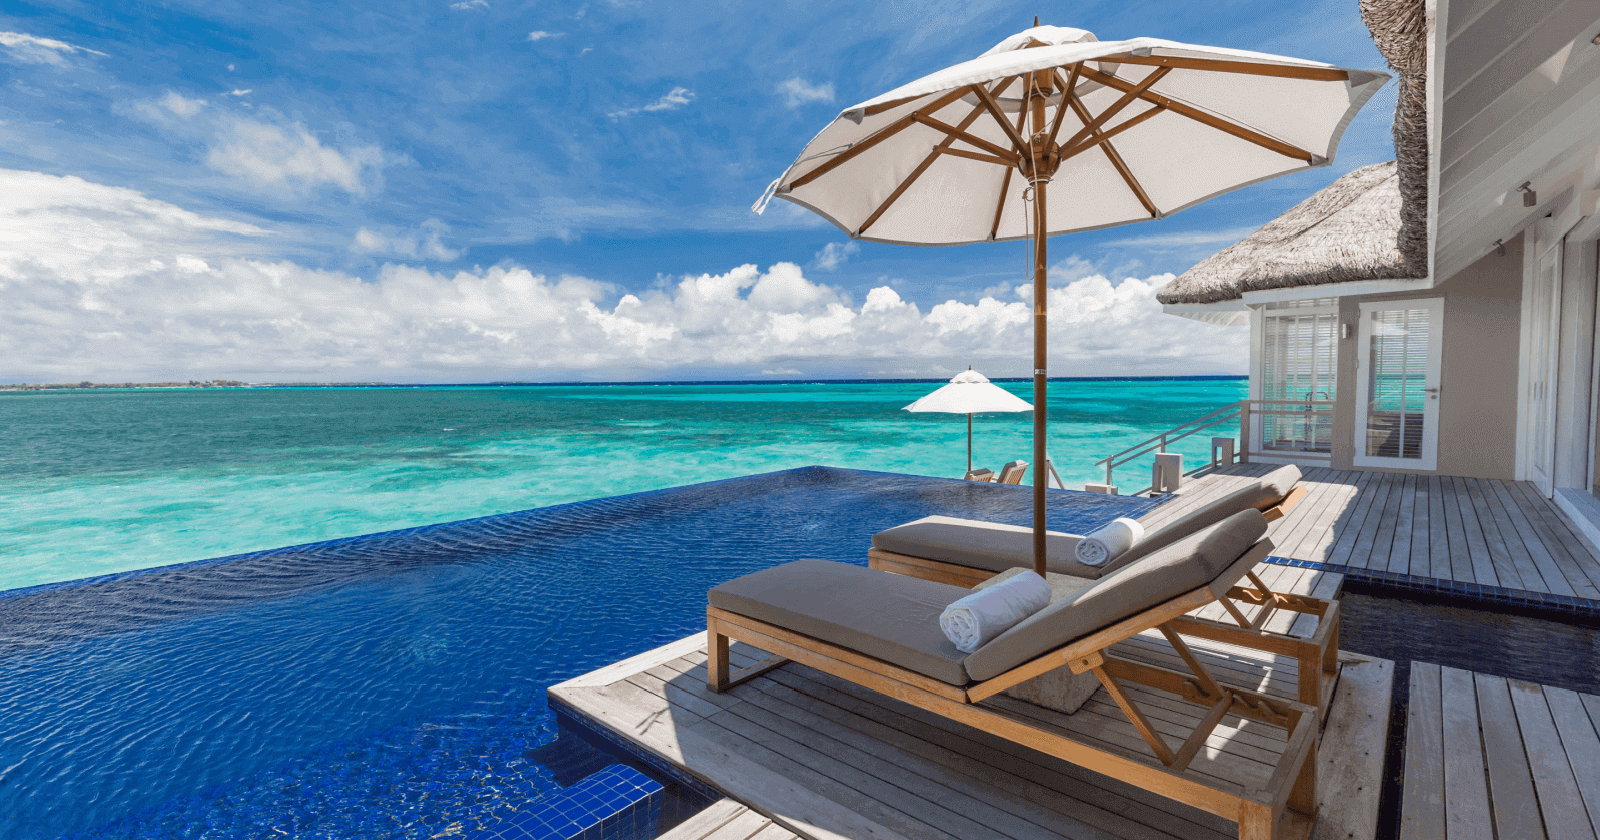 Luxury Hotels in the Maldives: Retreat Paradise